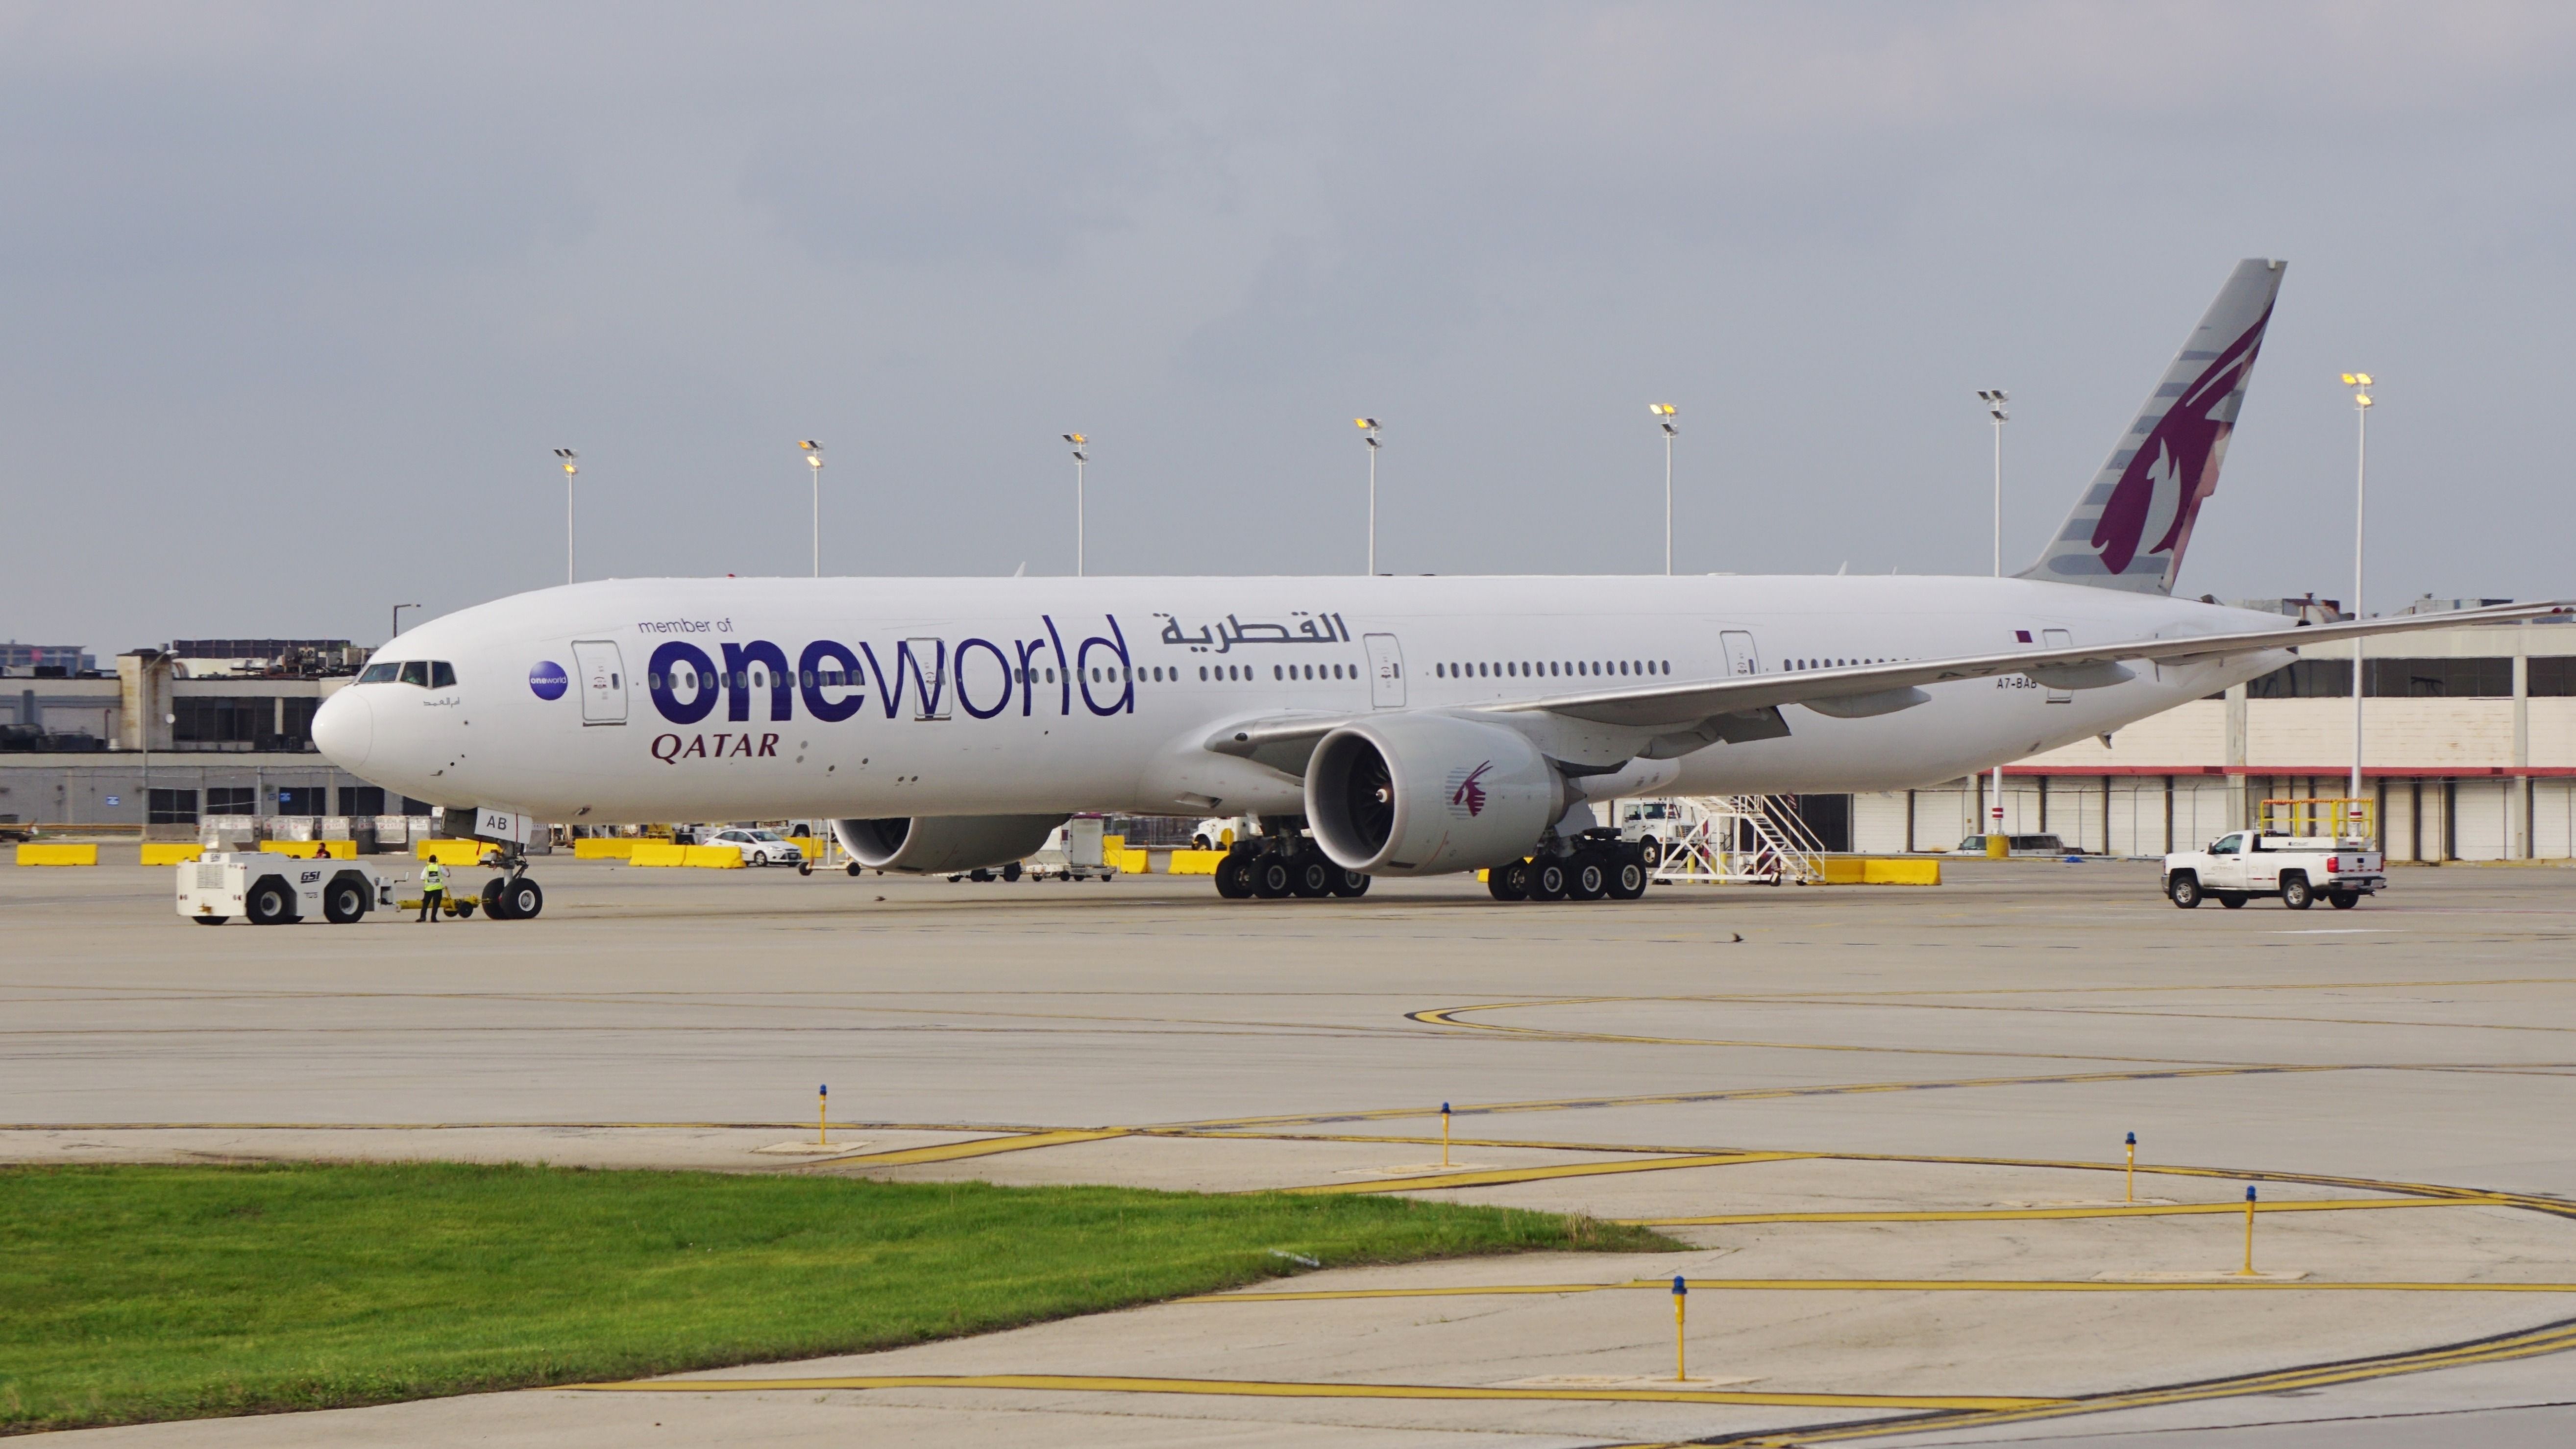 A Qatar Airways 777-300ER in OneWorld livery on an airport apron.